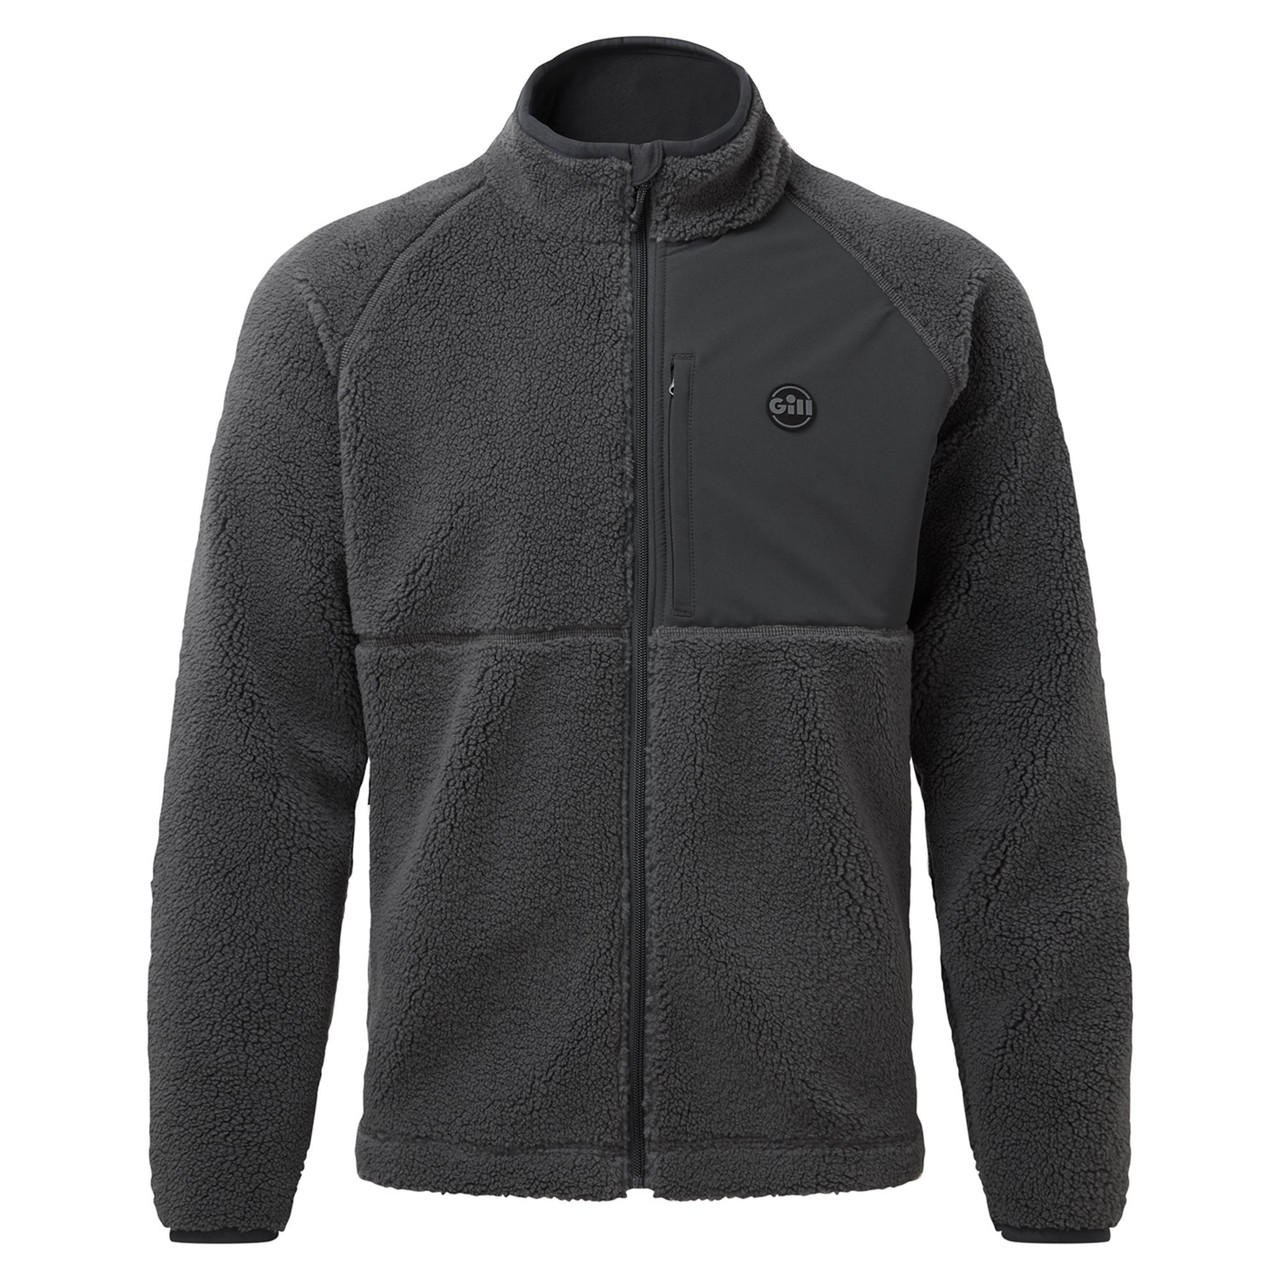 Hoodies and Fleeces - Gill Marine Official US Store